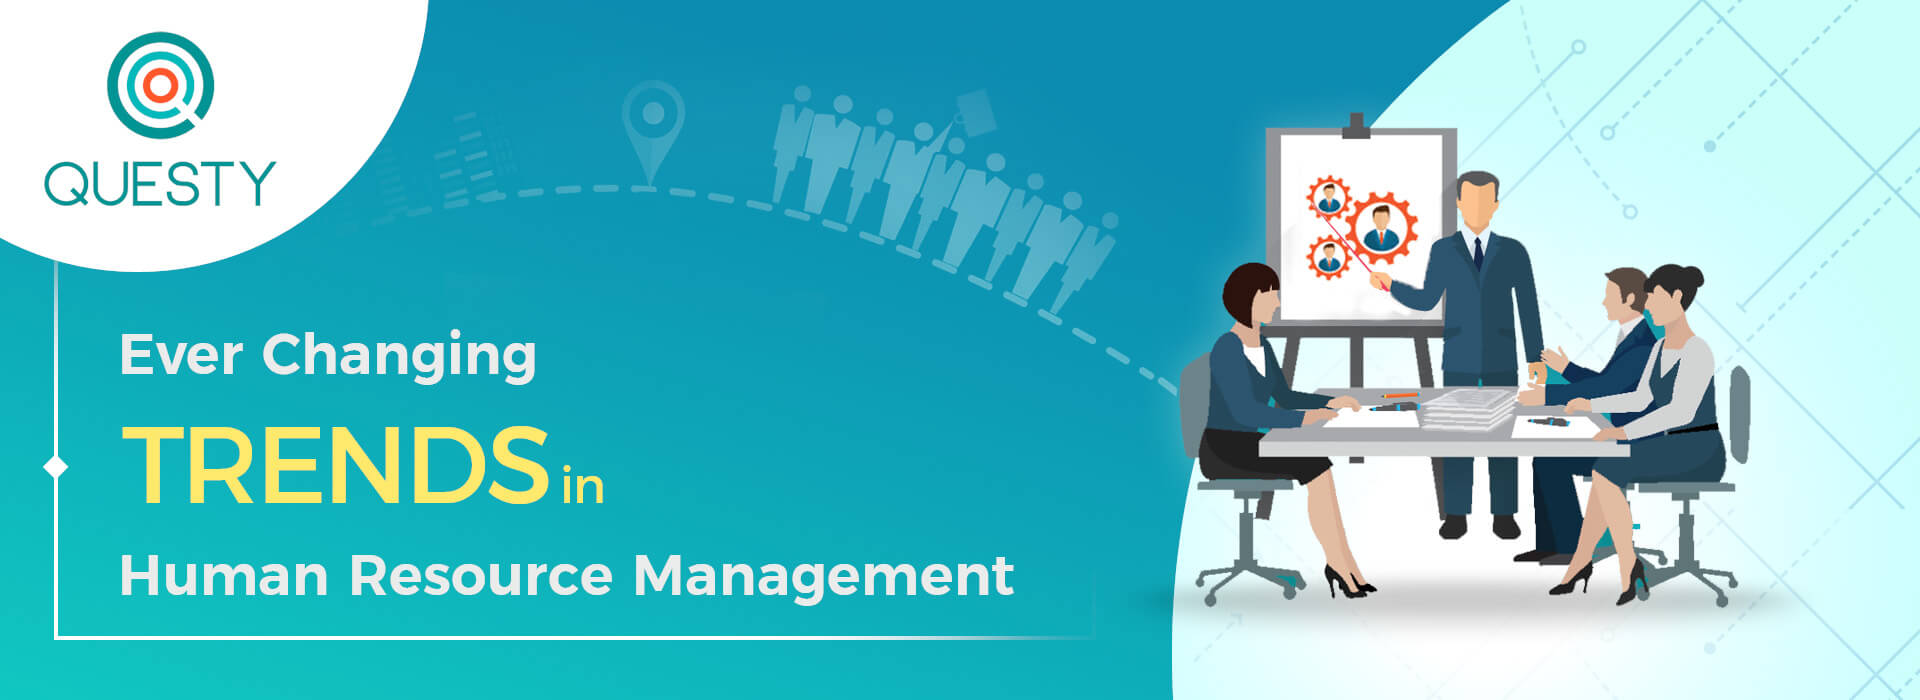 Trends in Human Resource Management